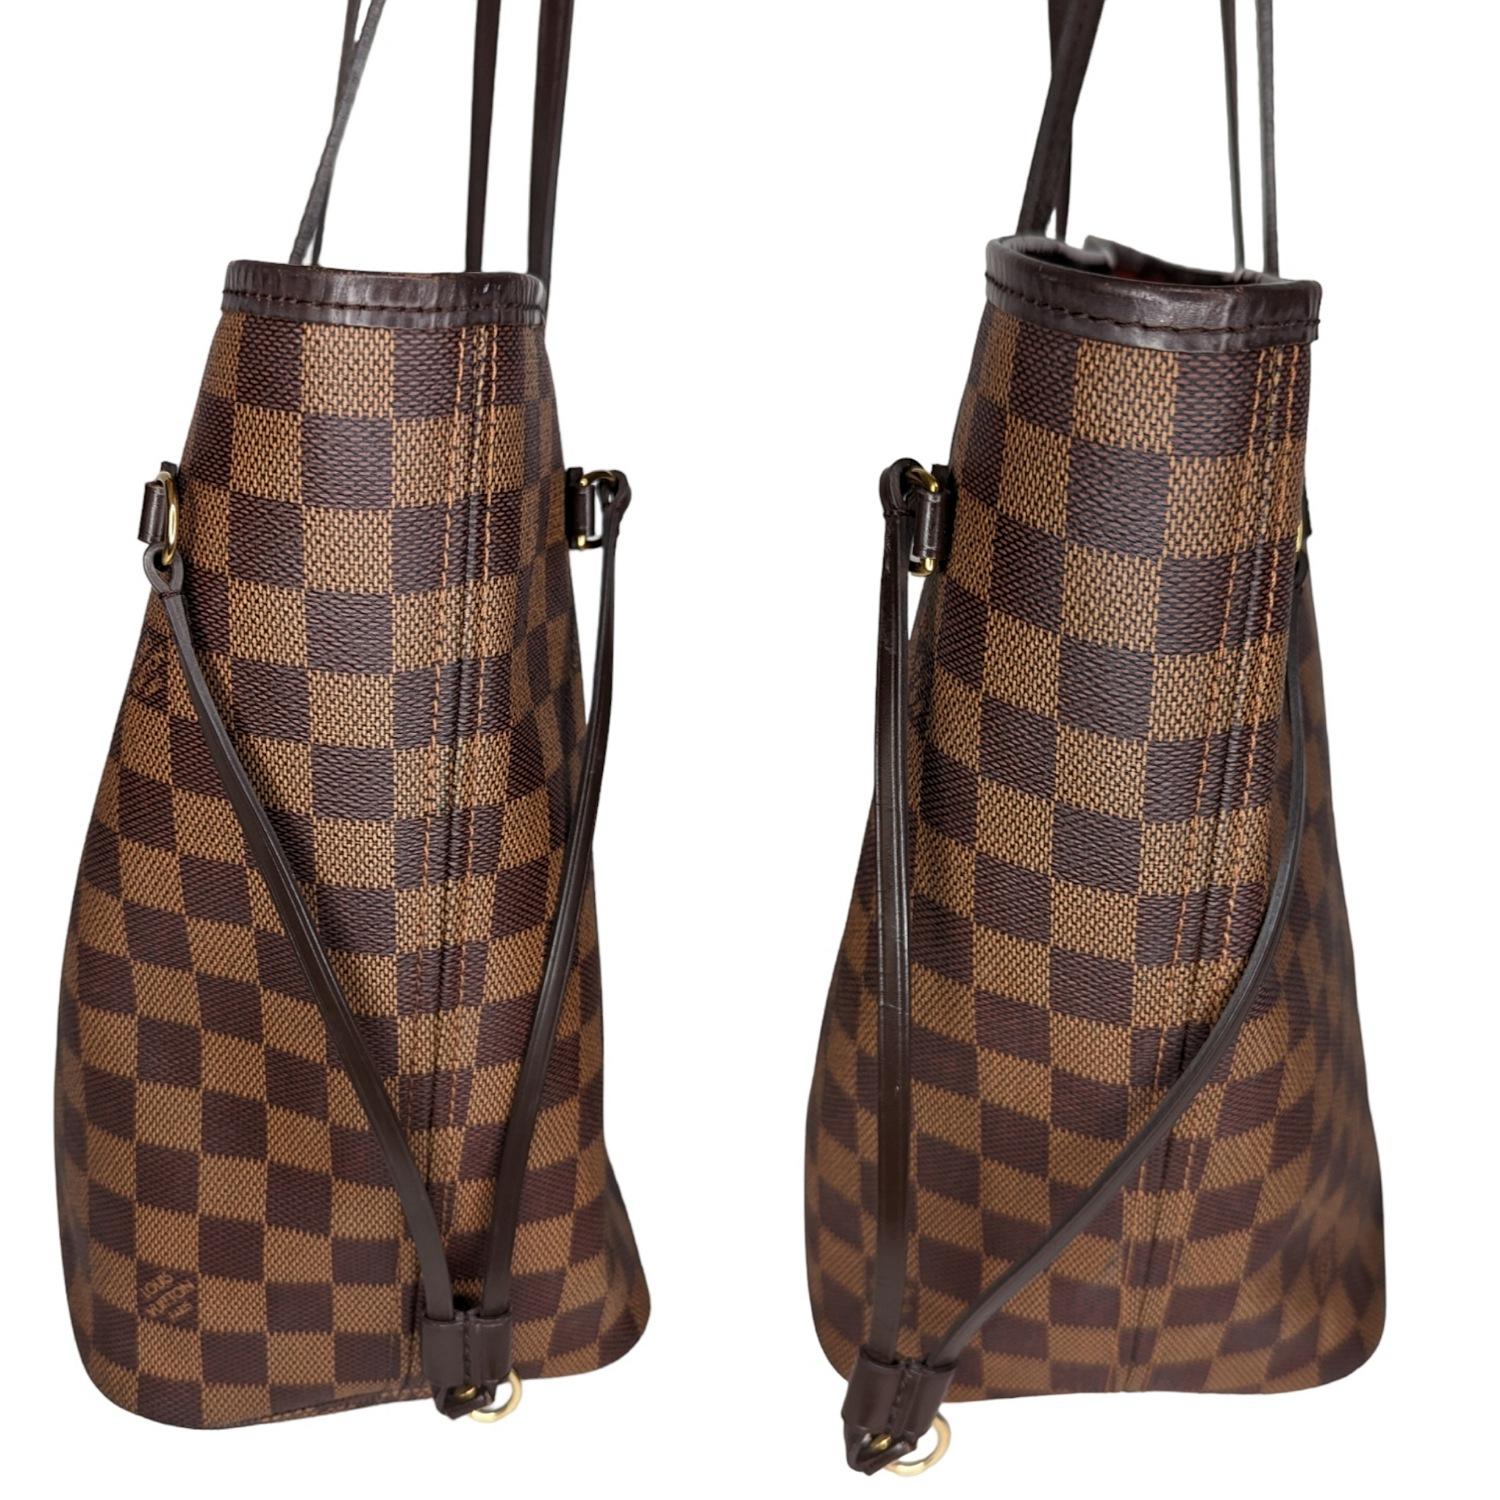 Louis Vuitton 2018 Neverfull Damier Ebene MM Tote In Good Condition For Sale In Scottsdale, AZ